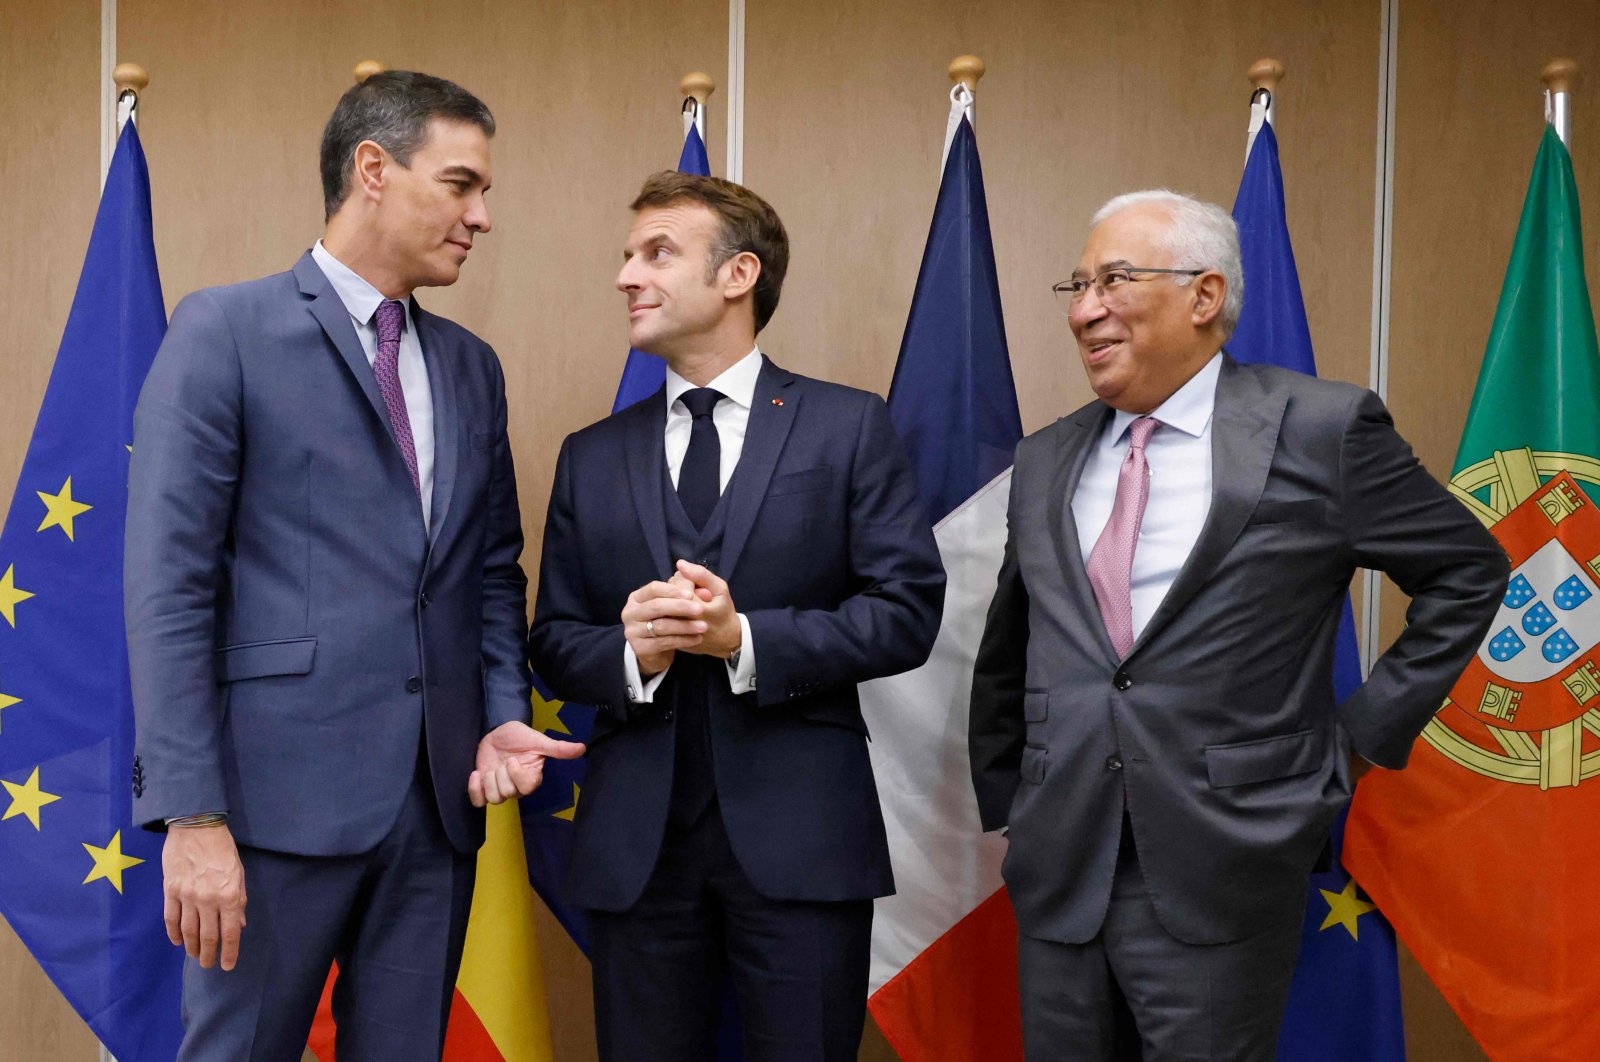 French President Emmanuel Macron (C), Spain&#039;s Prime Minister Pedro Sanchez (L) and Portugal&#039;s Prime Minister Antonio Costa pose ahead of their meeting on the sideline of an EU leaders Summit in Brussels, Belgium, Oct. 20, 2022. (AFP Photo)